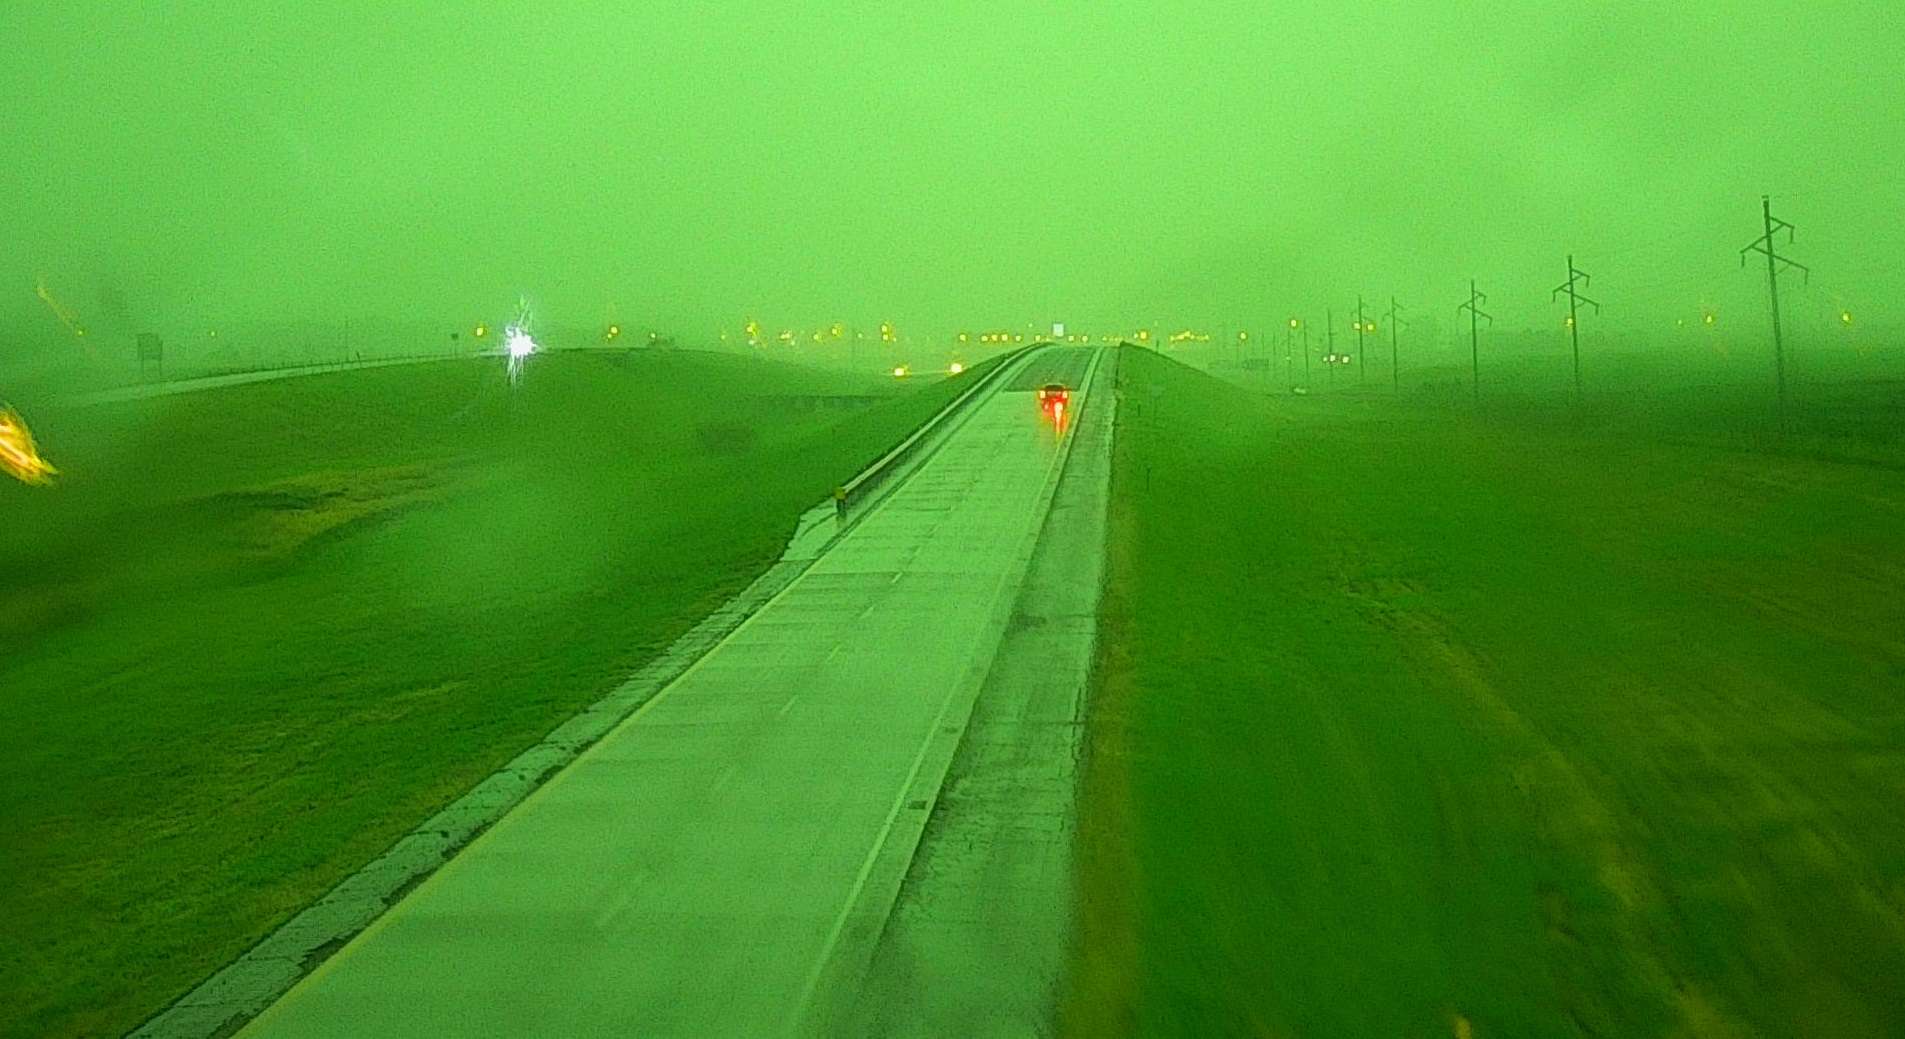 The sky turned green on Tuesday in the United States